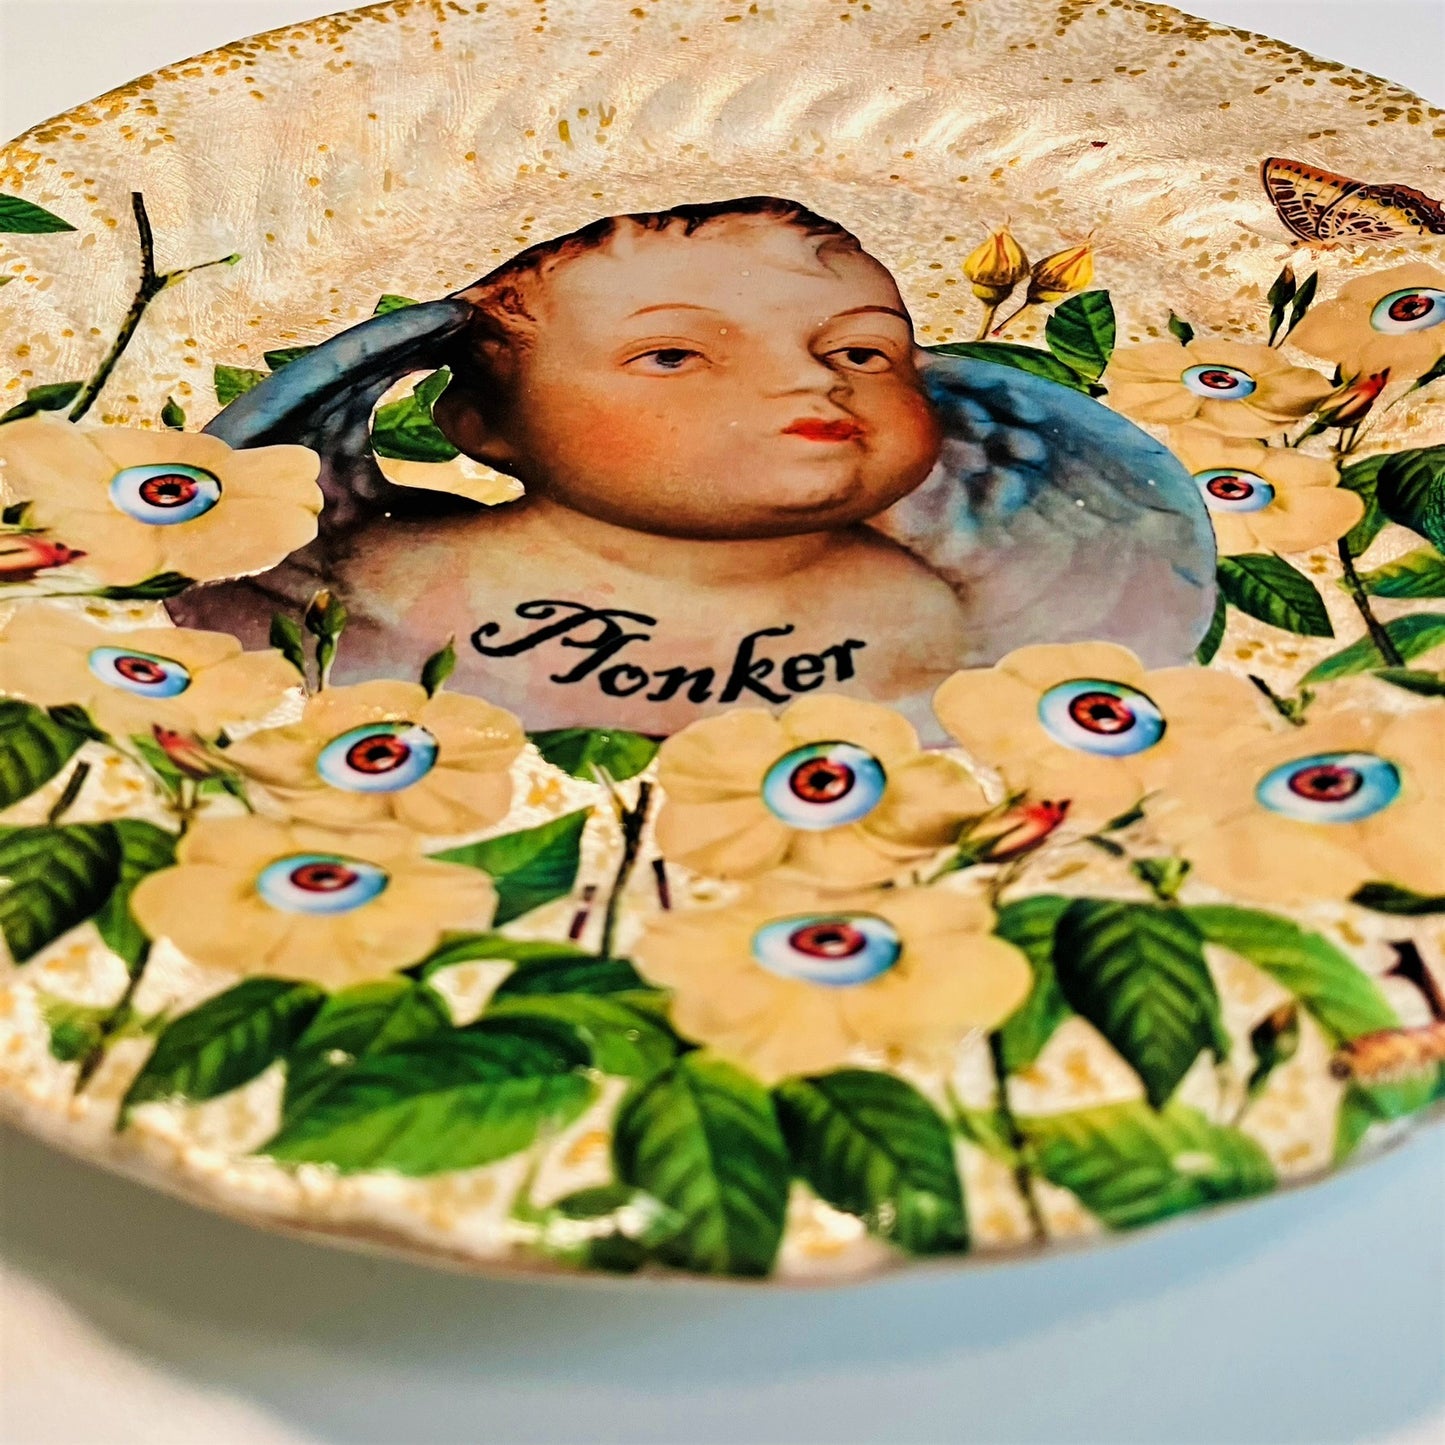 Cream Upcycled Wall Plate - "Plonker" - by House of Frisson